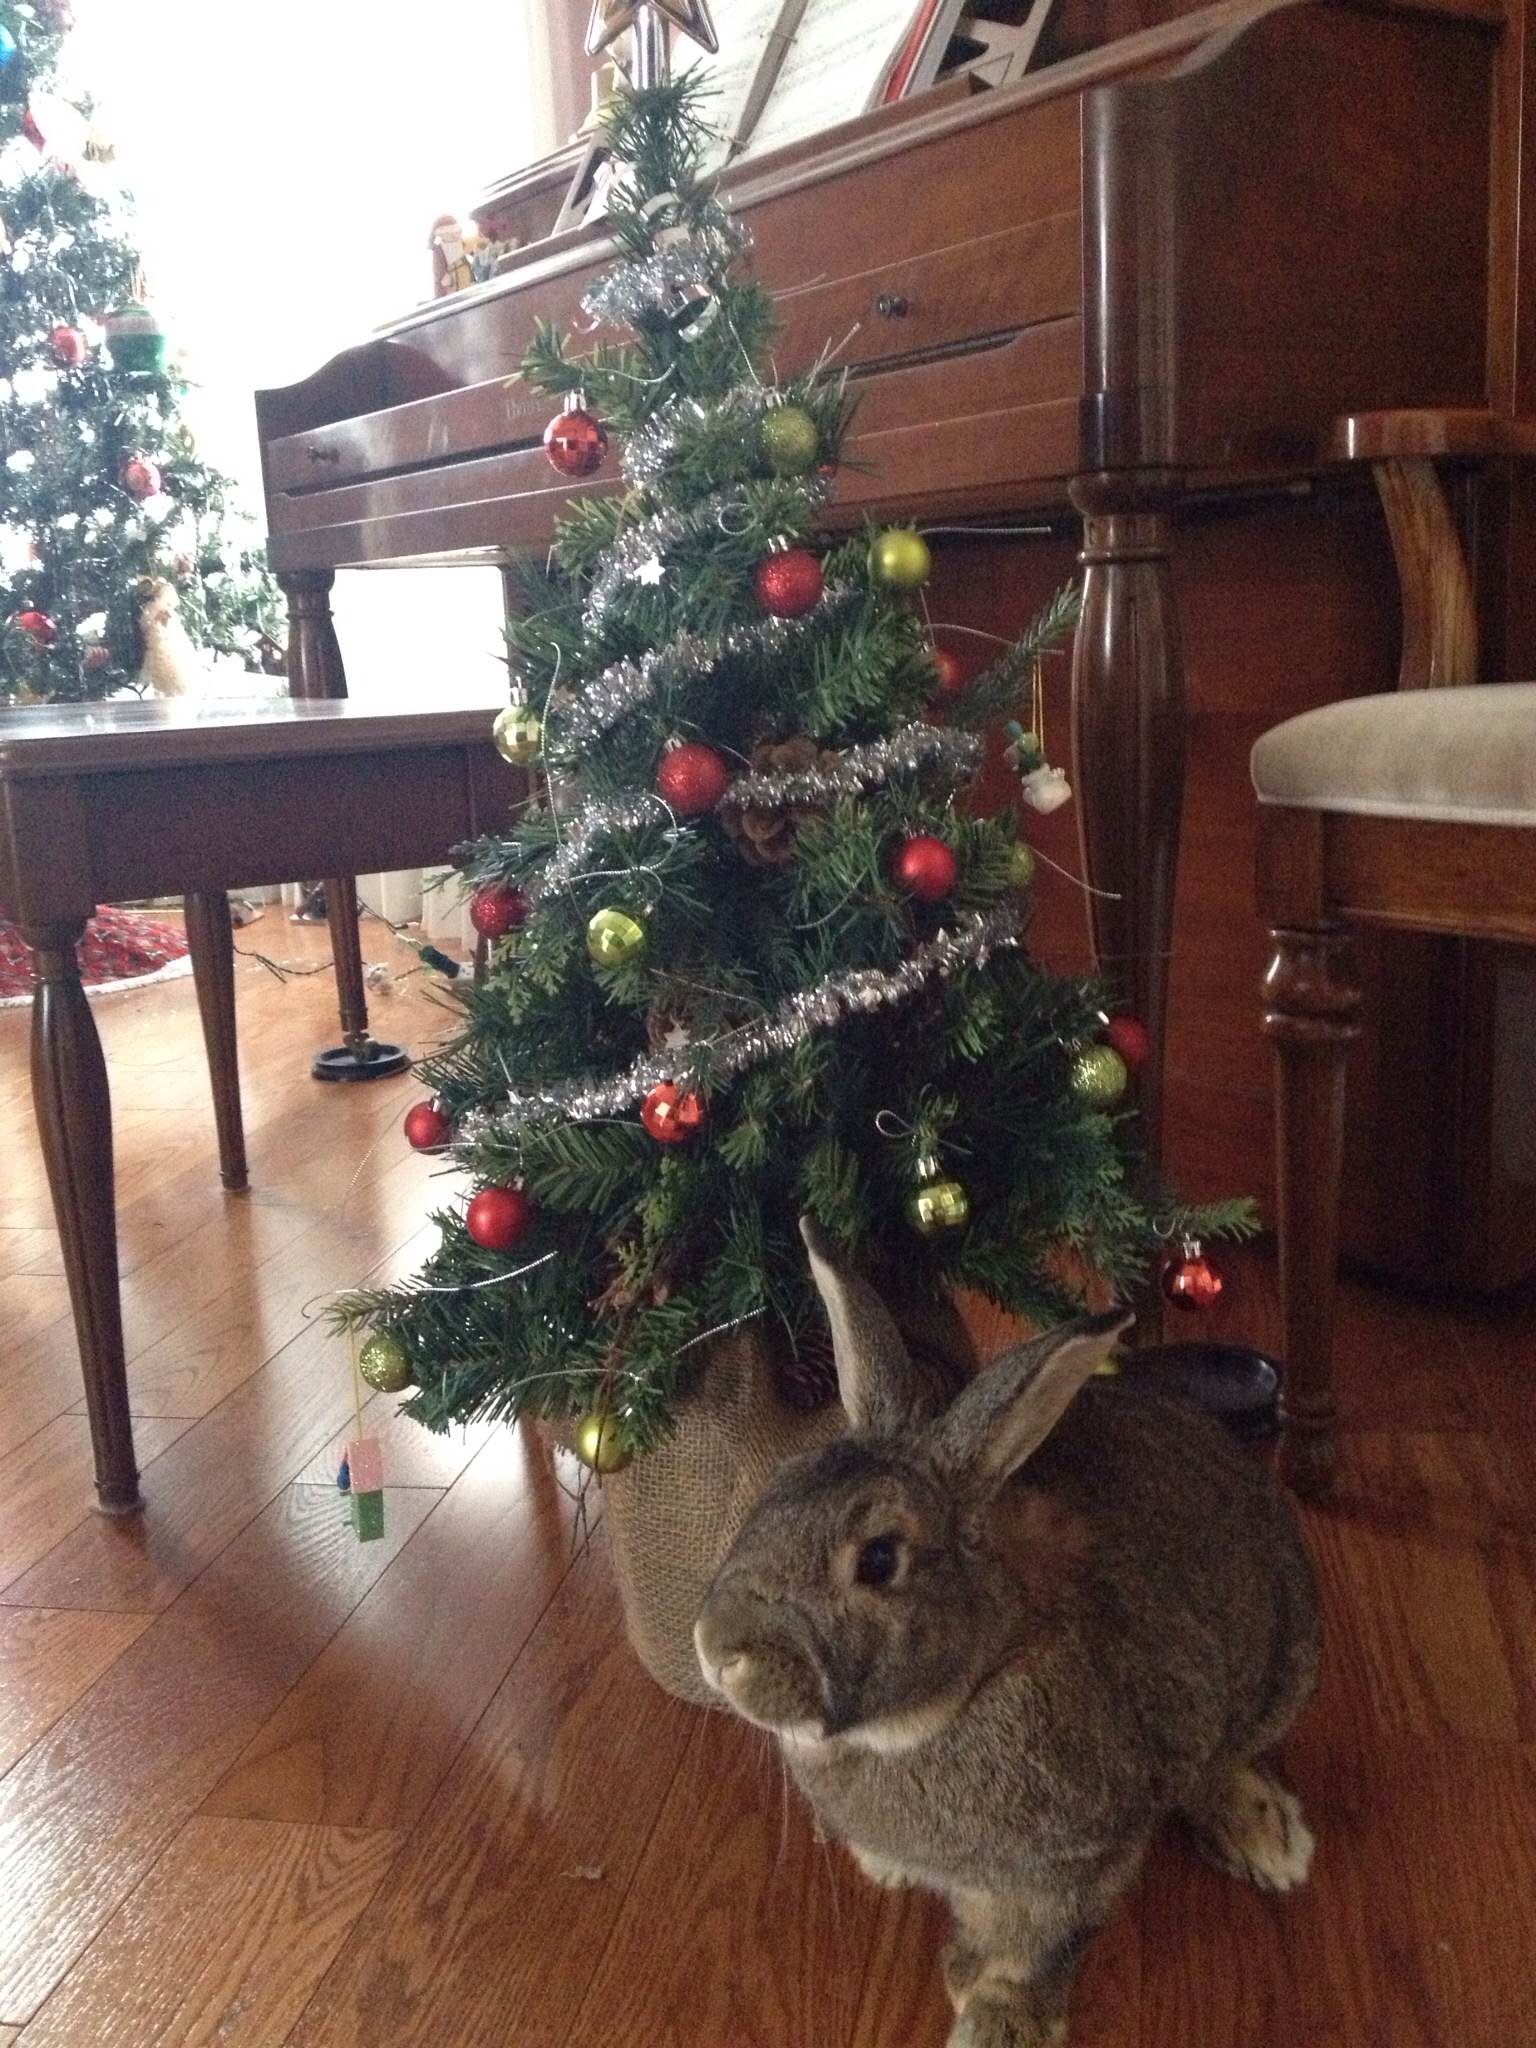 Bunny Gets His Own Bunny-Sized Christmas Tree